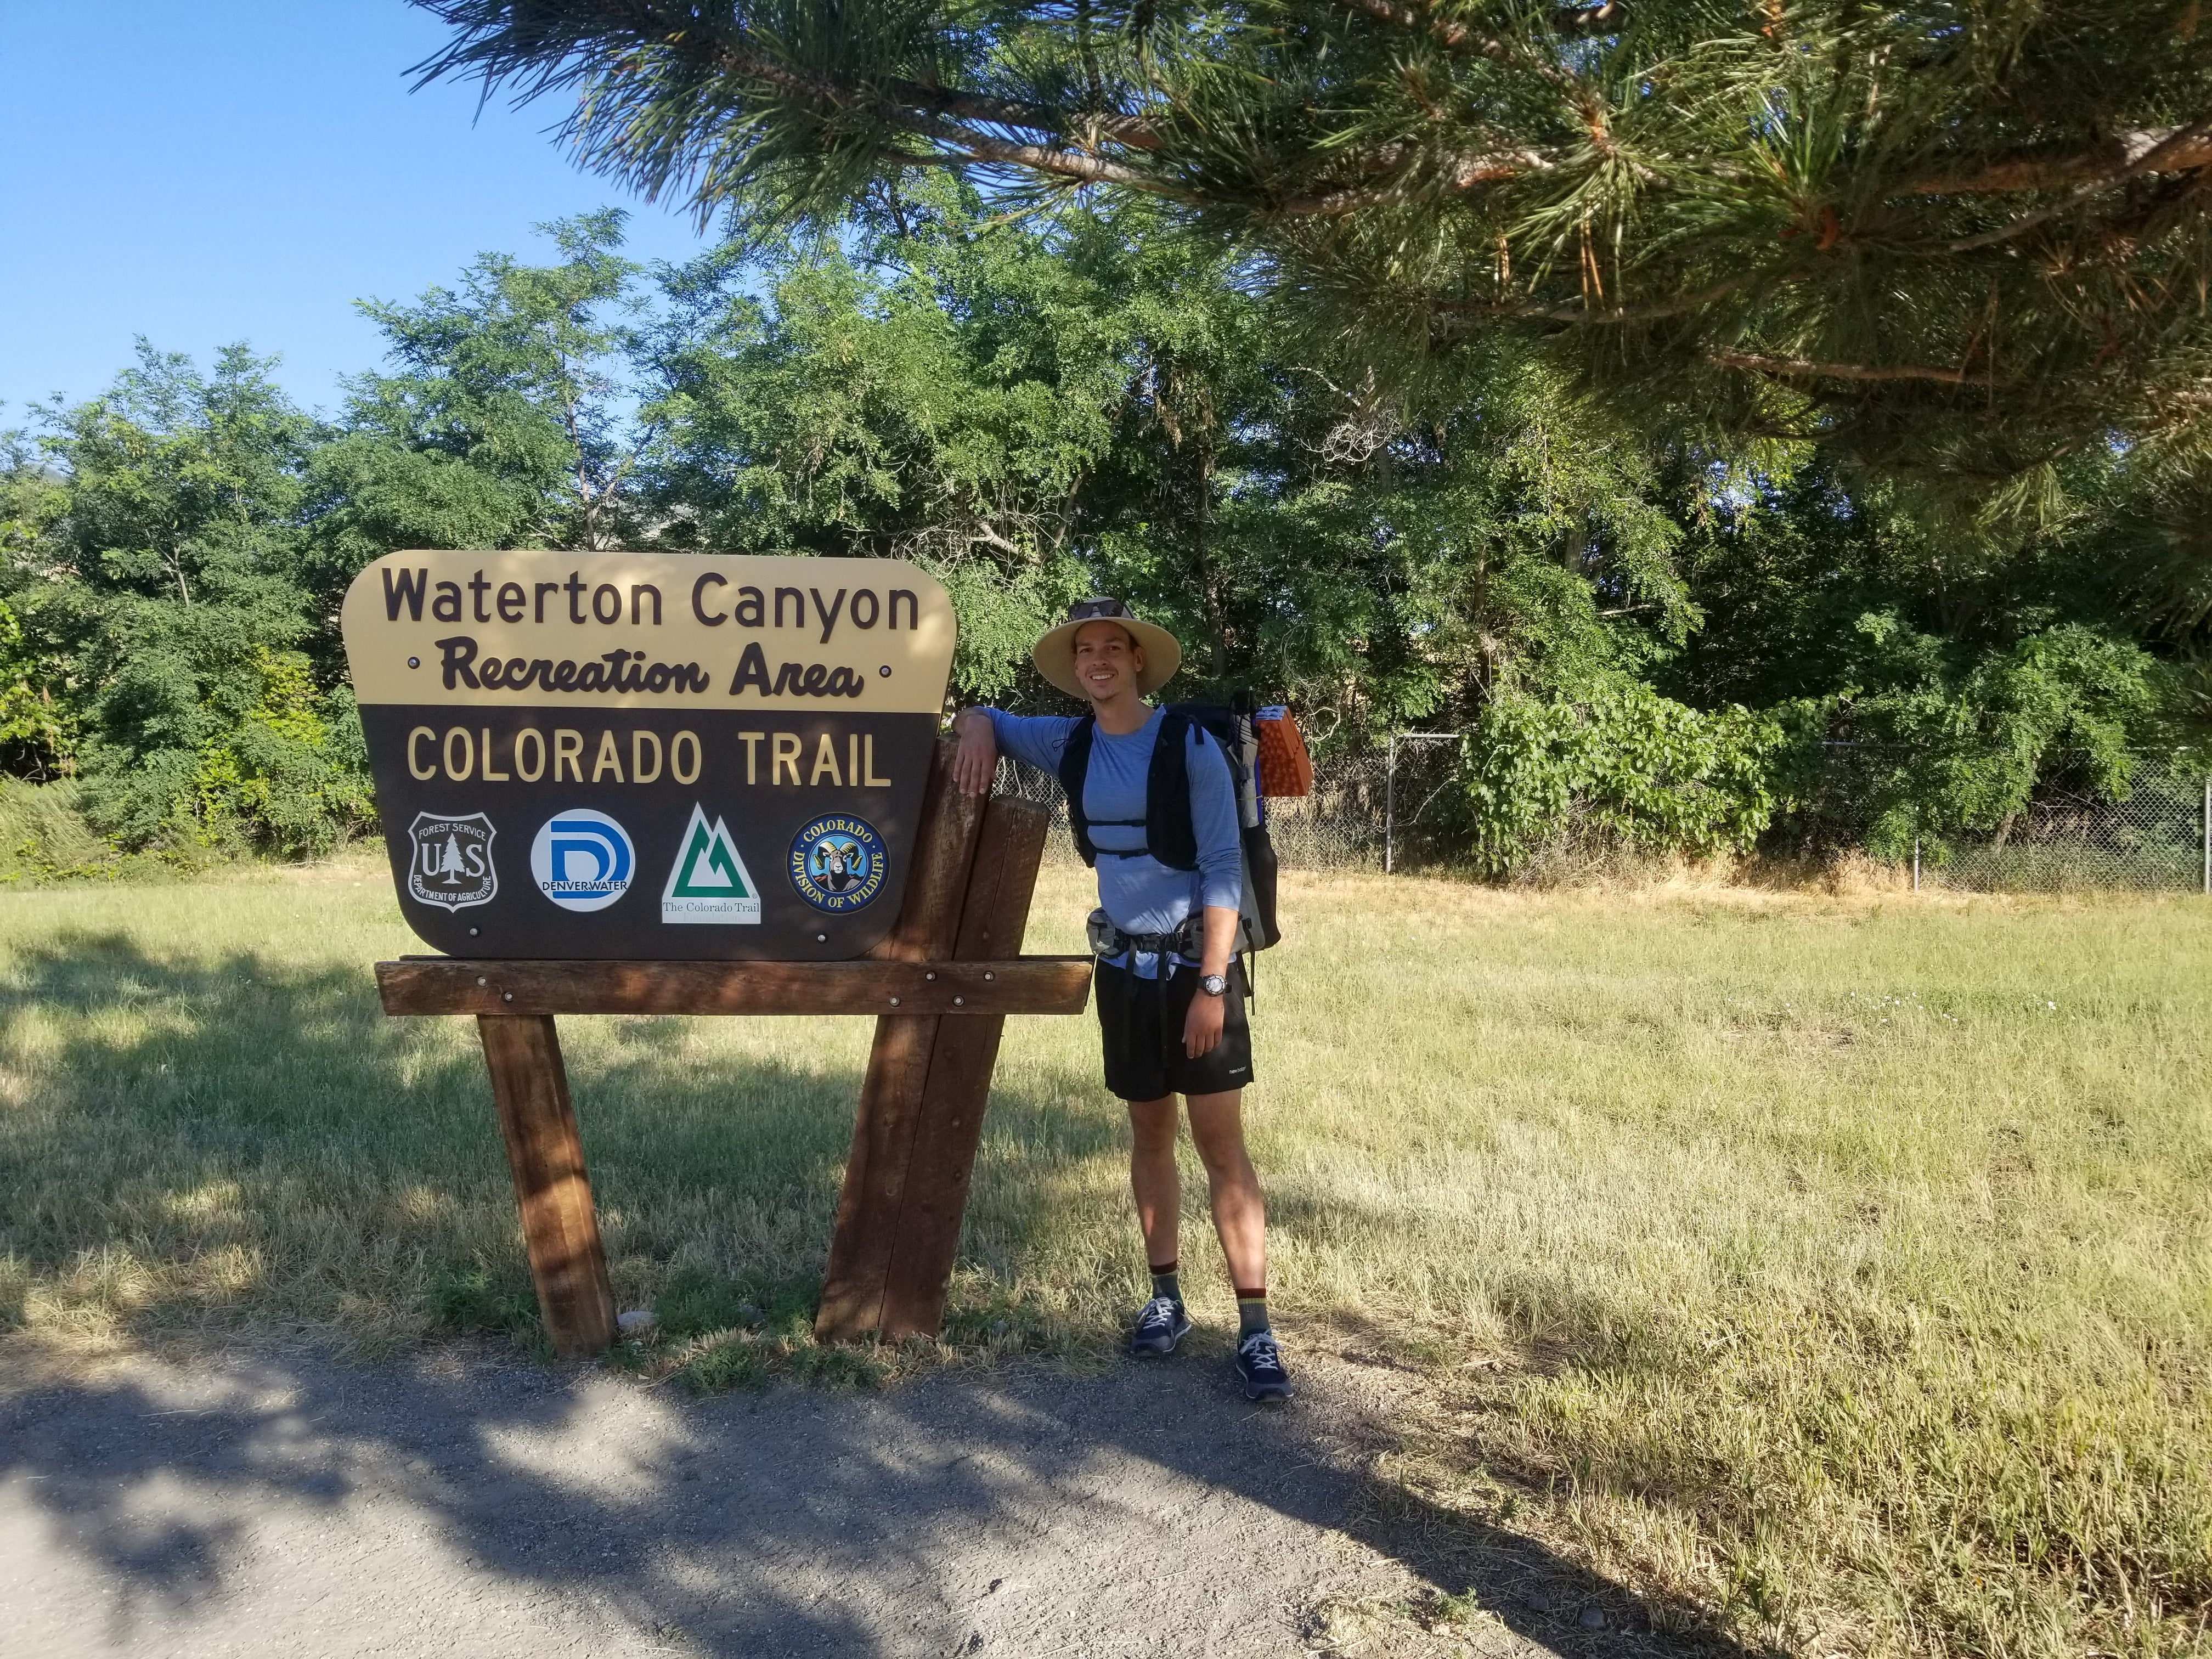 The Colorado Trail , 485 Miles from Denver to Durango by Francisco "Karate Kid" Miller